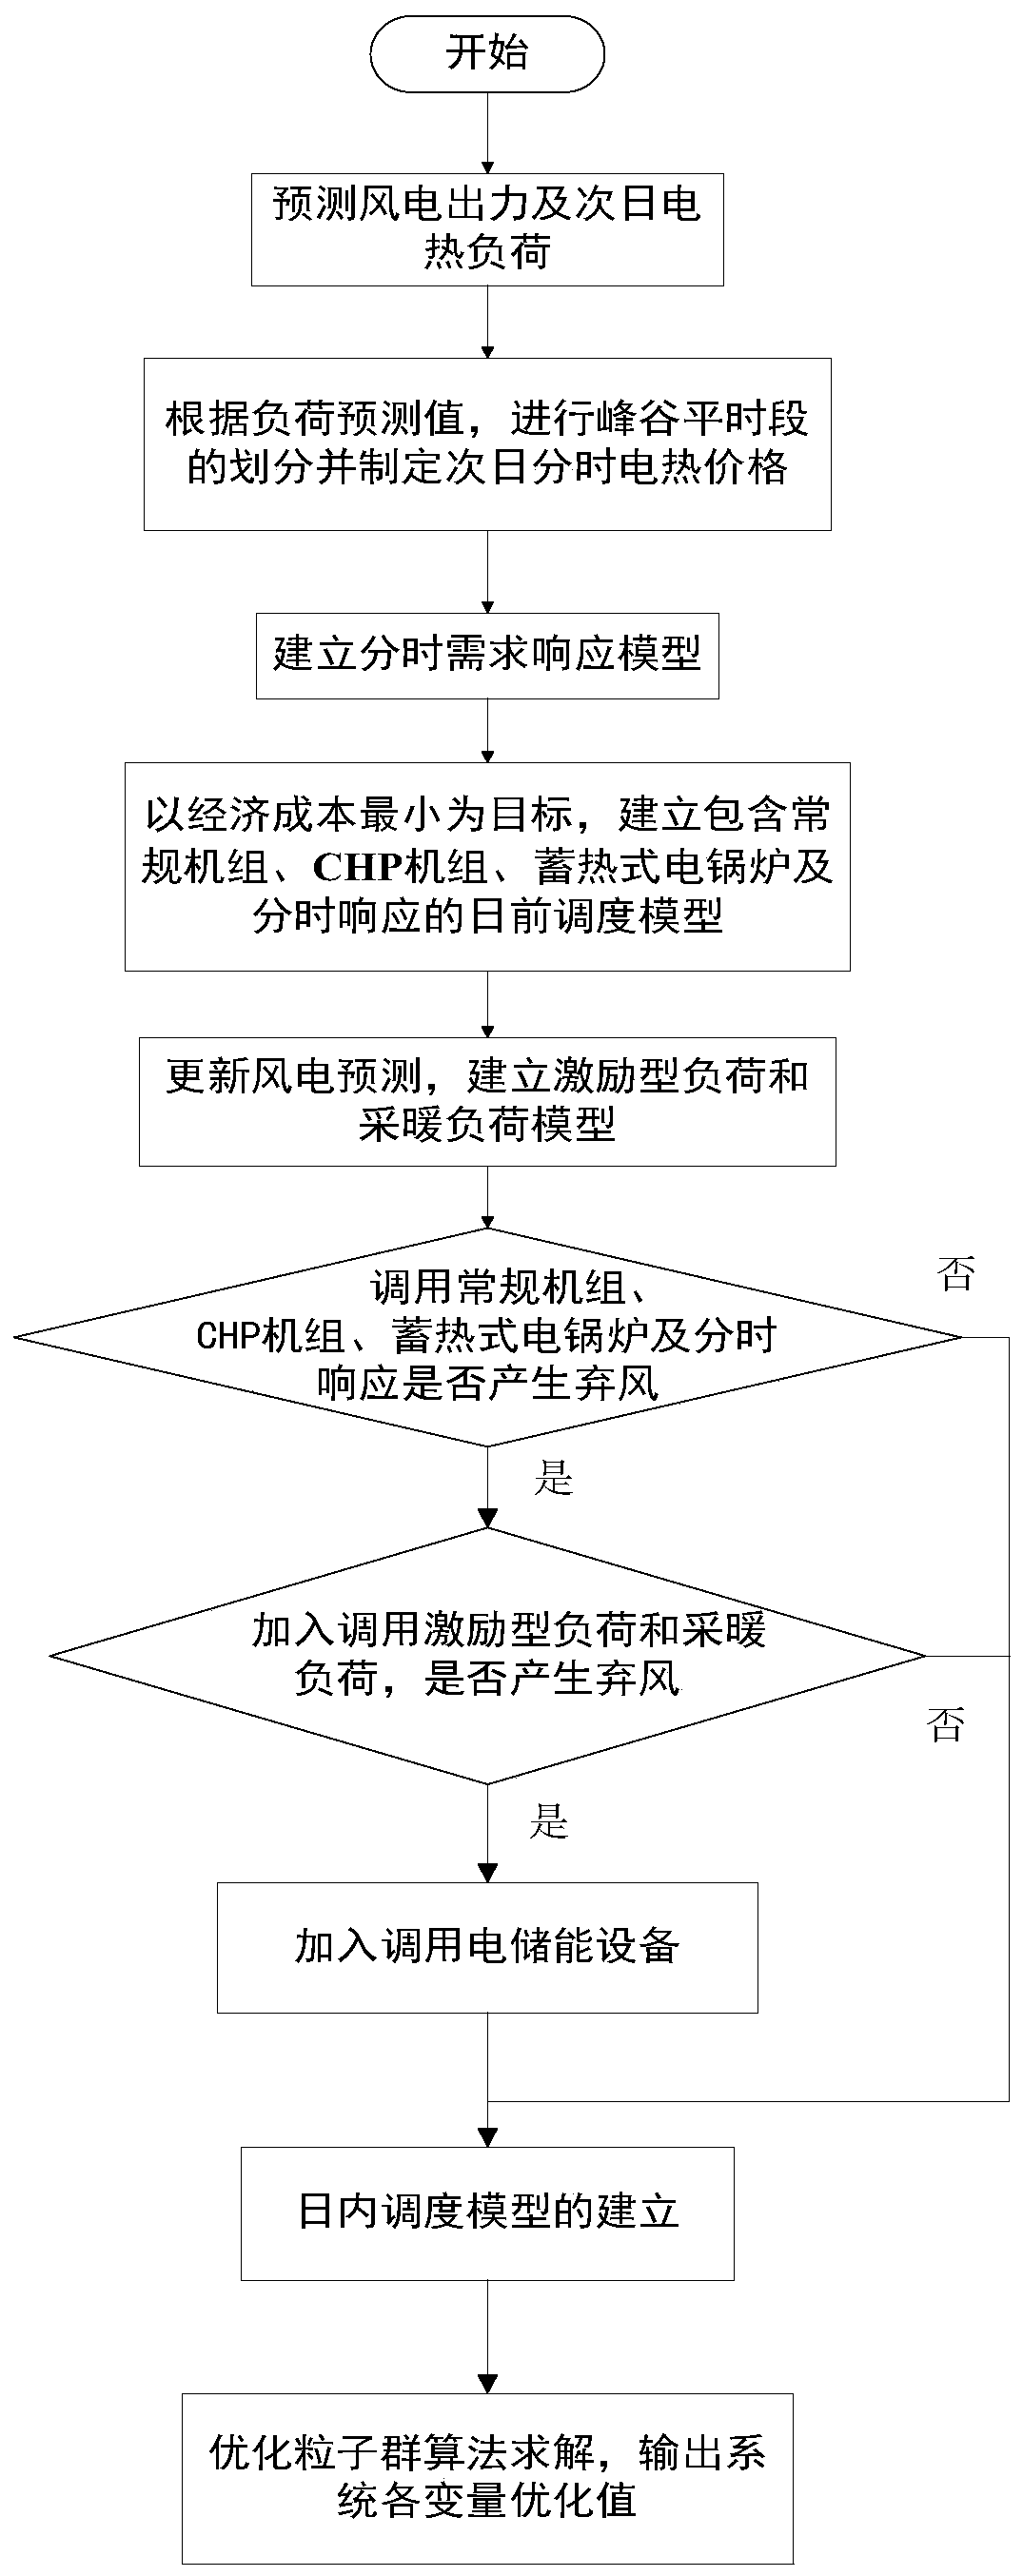 Two-stage source load storage optimization scheduling method for wind power consumption